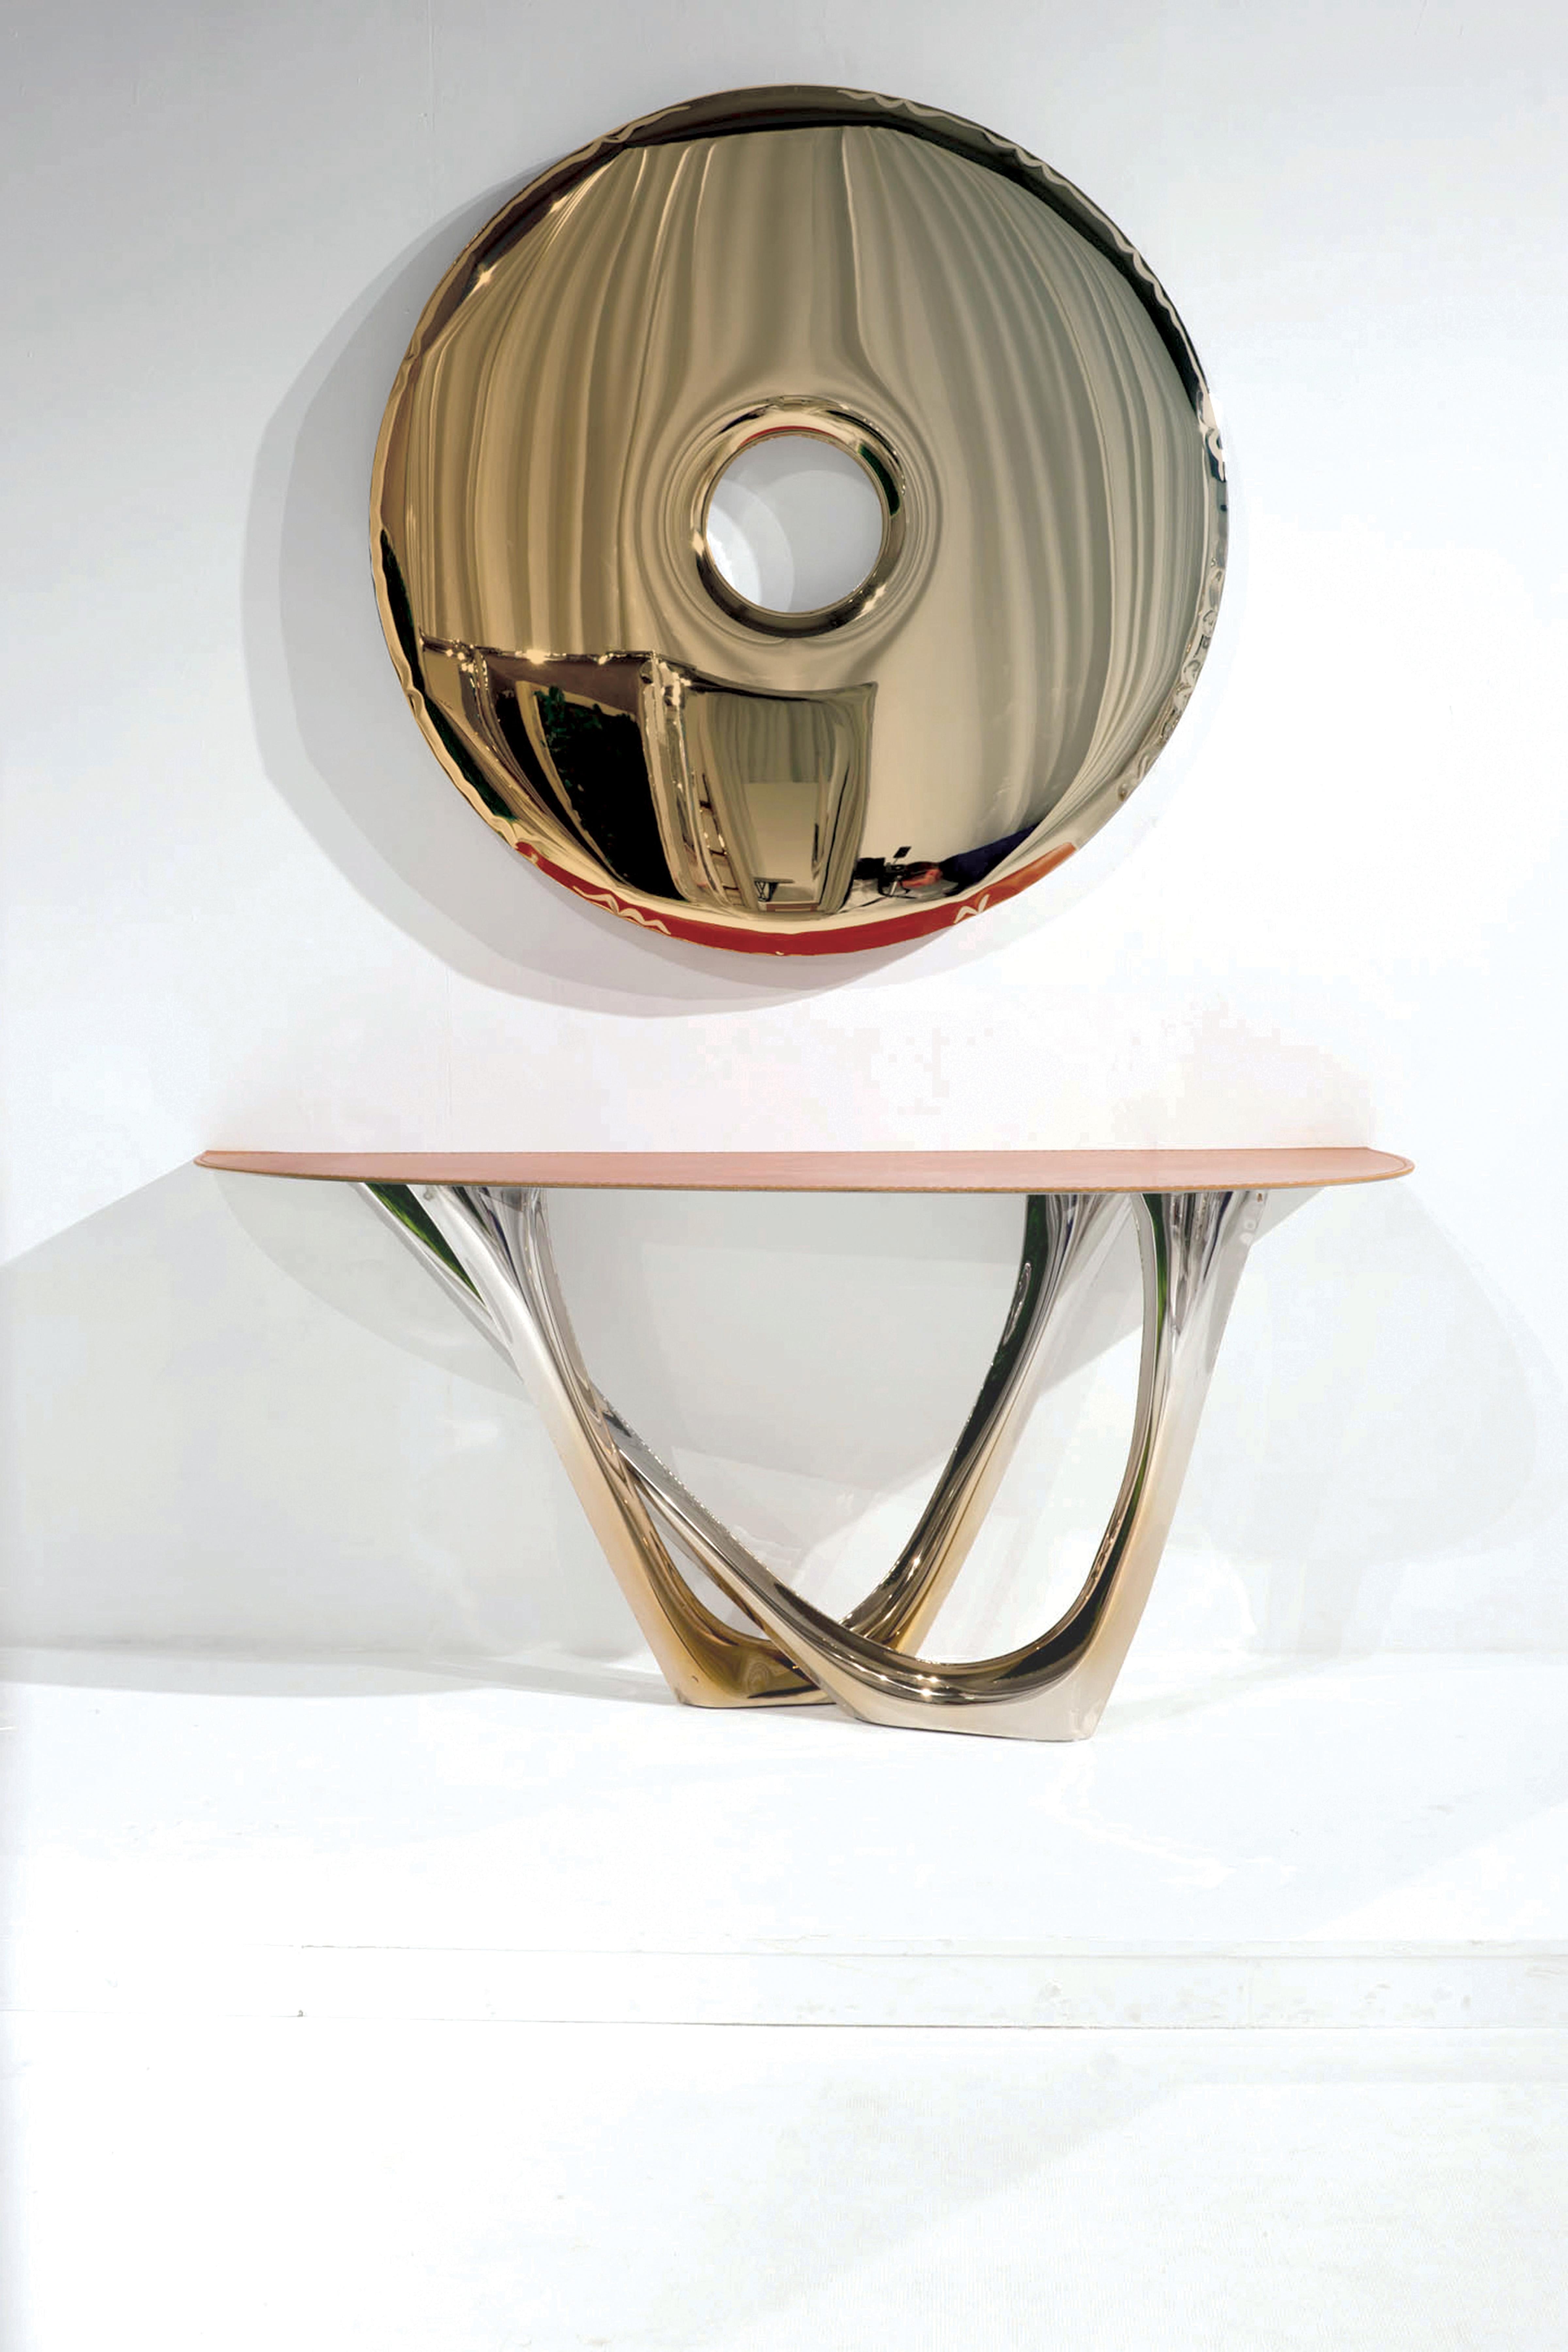 The Rondo mirror is made of stainless steel polished to high gloss. Its polished surface is perfectly reflecting the light and other objects placed in the same room or hall. Largescale convexities that appear on the surface of the mirror are